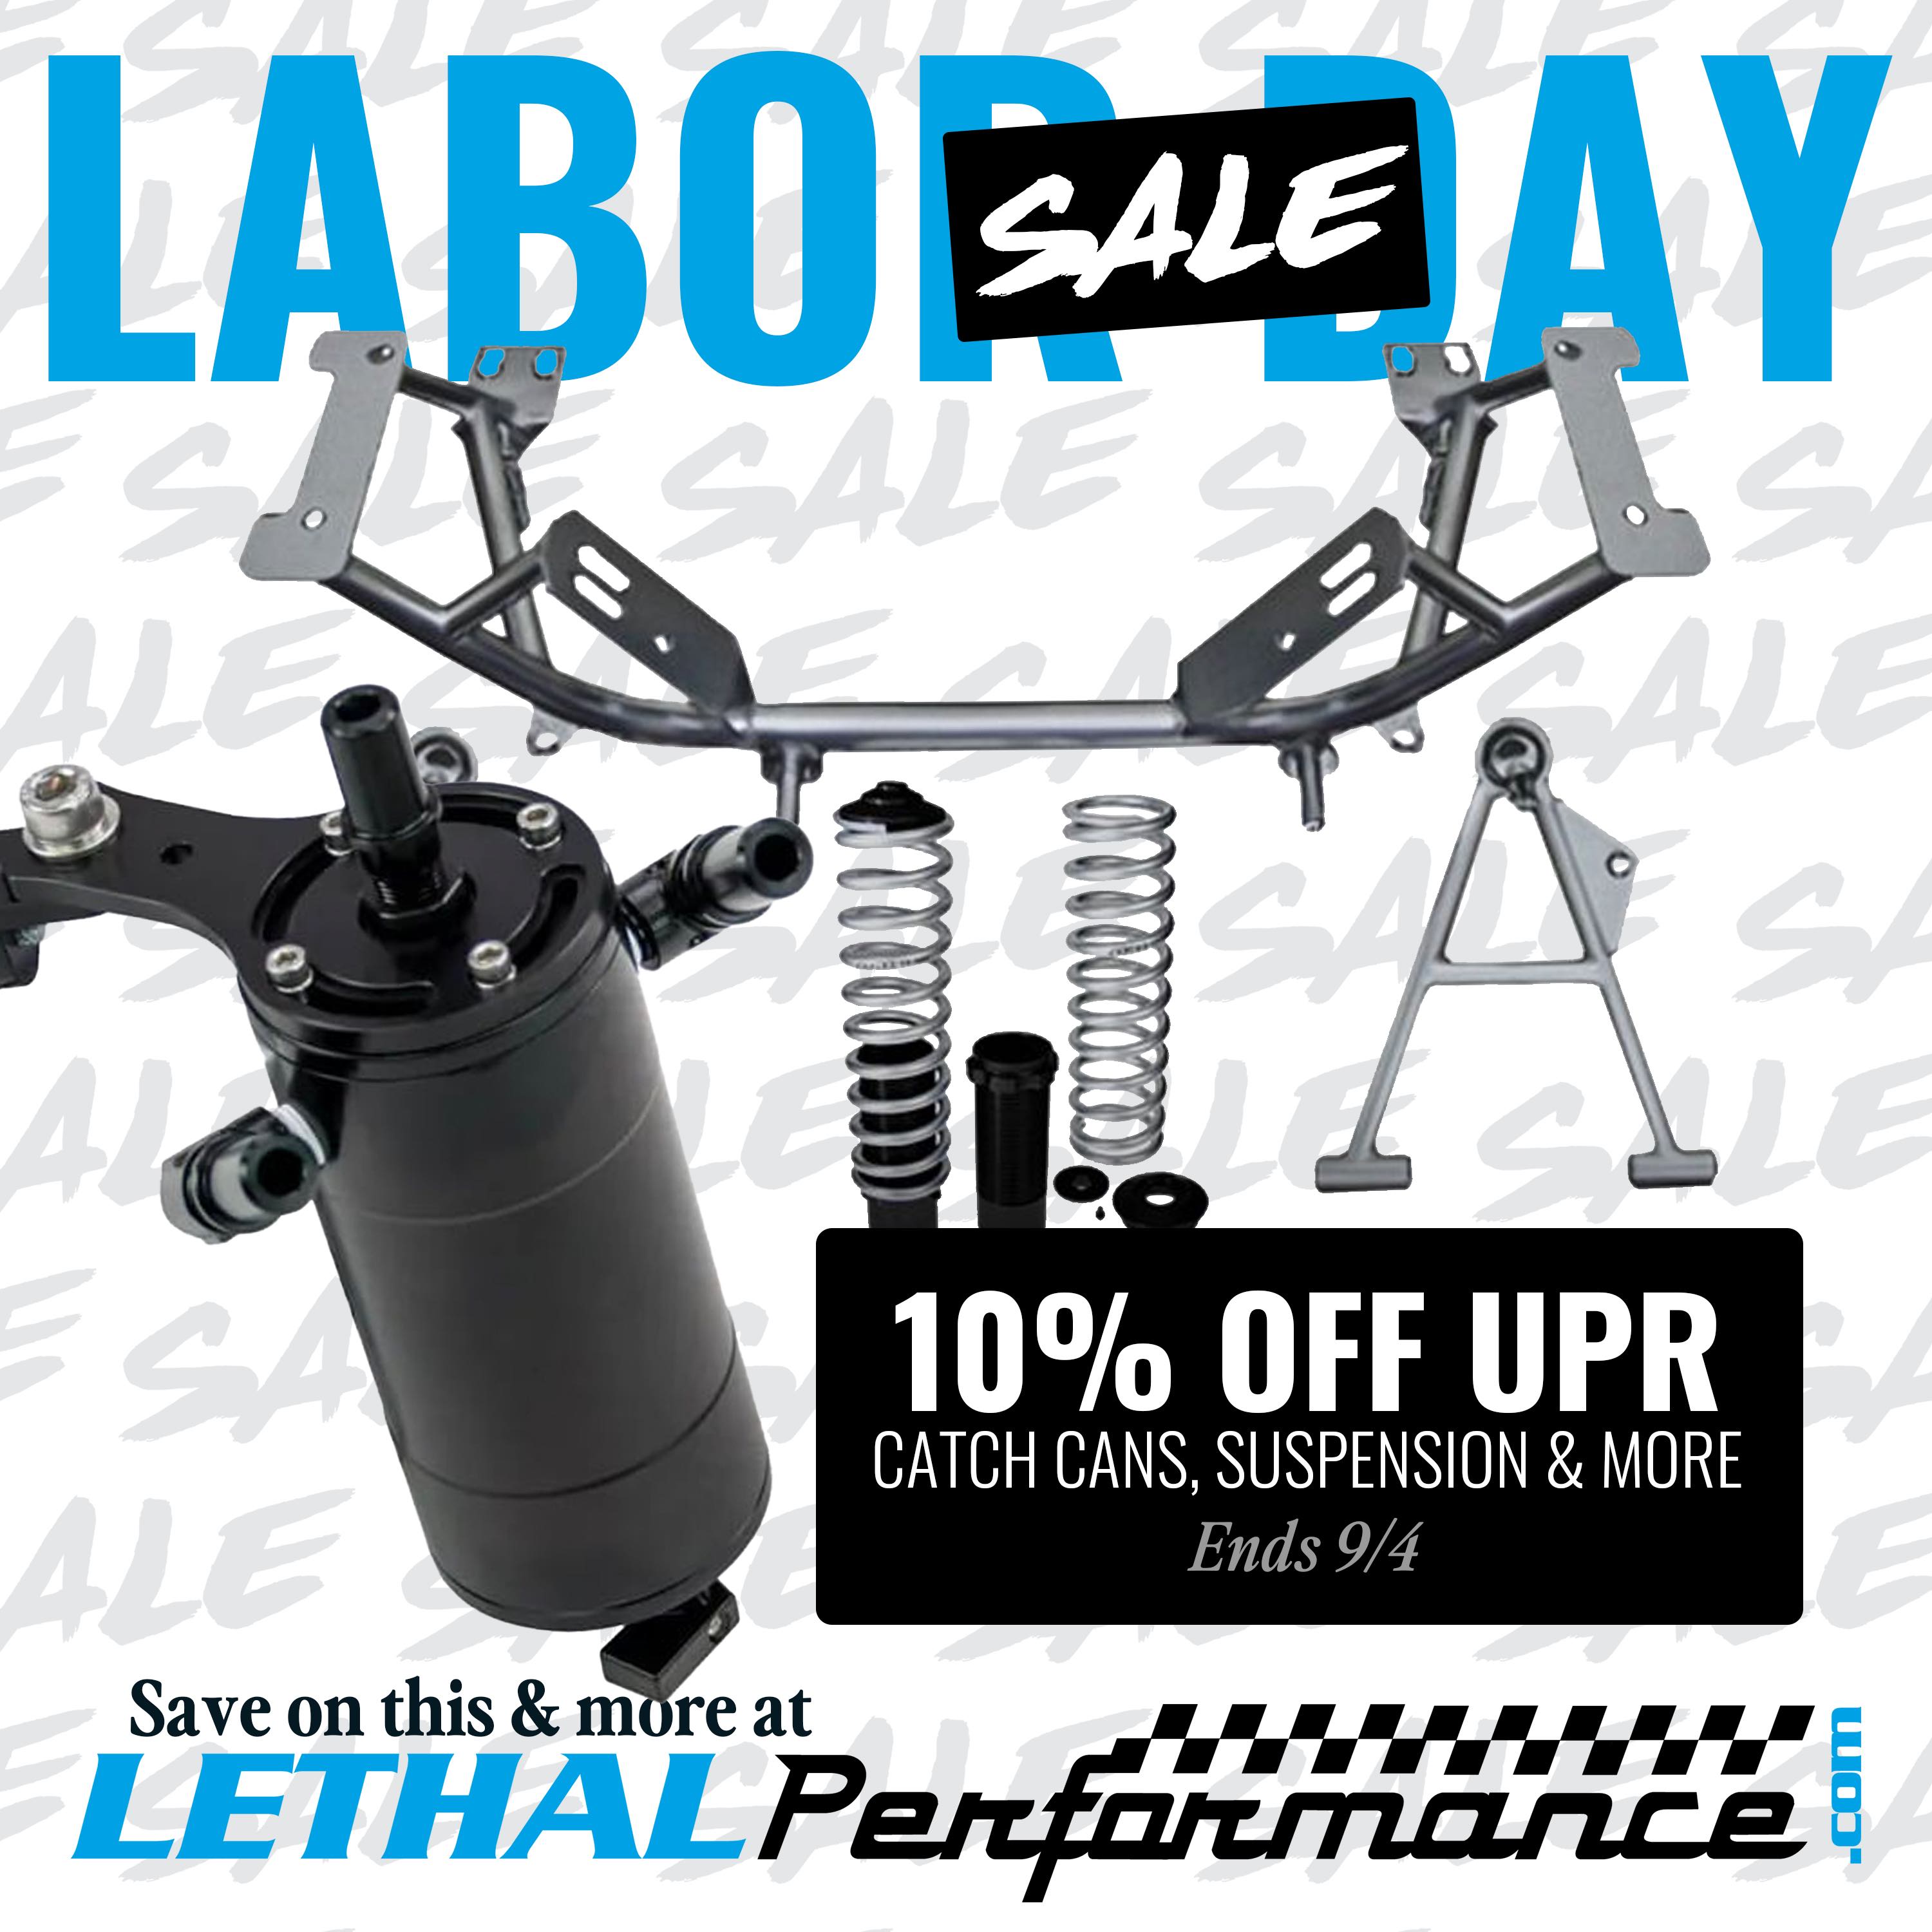 Ford Bronco Labor Day Sales START NOW at Lethal Performance!! upr